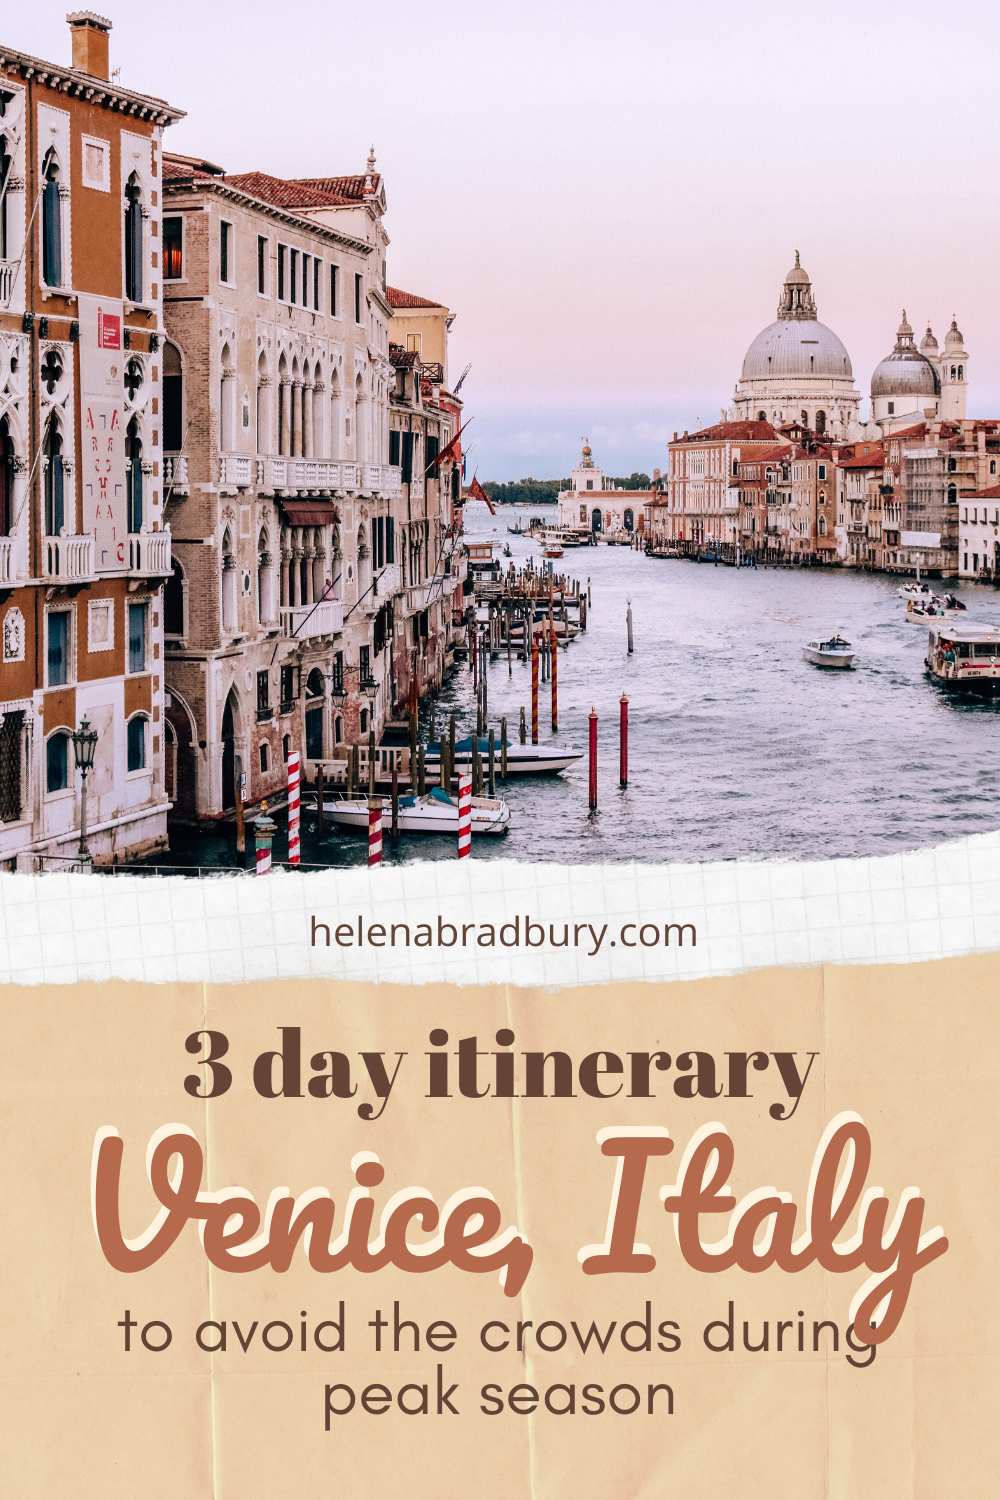  3 days in Venice: a Venice itinerary for peak season to avoid the crowds 